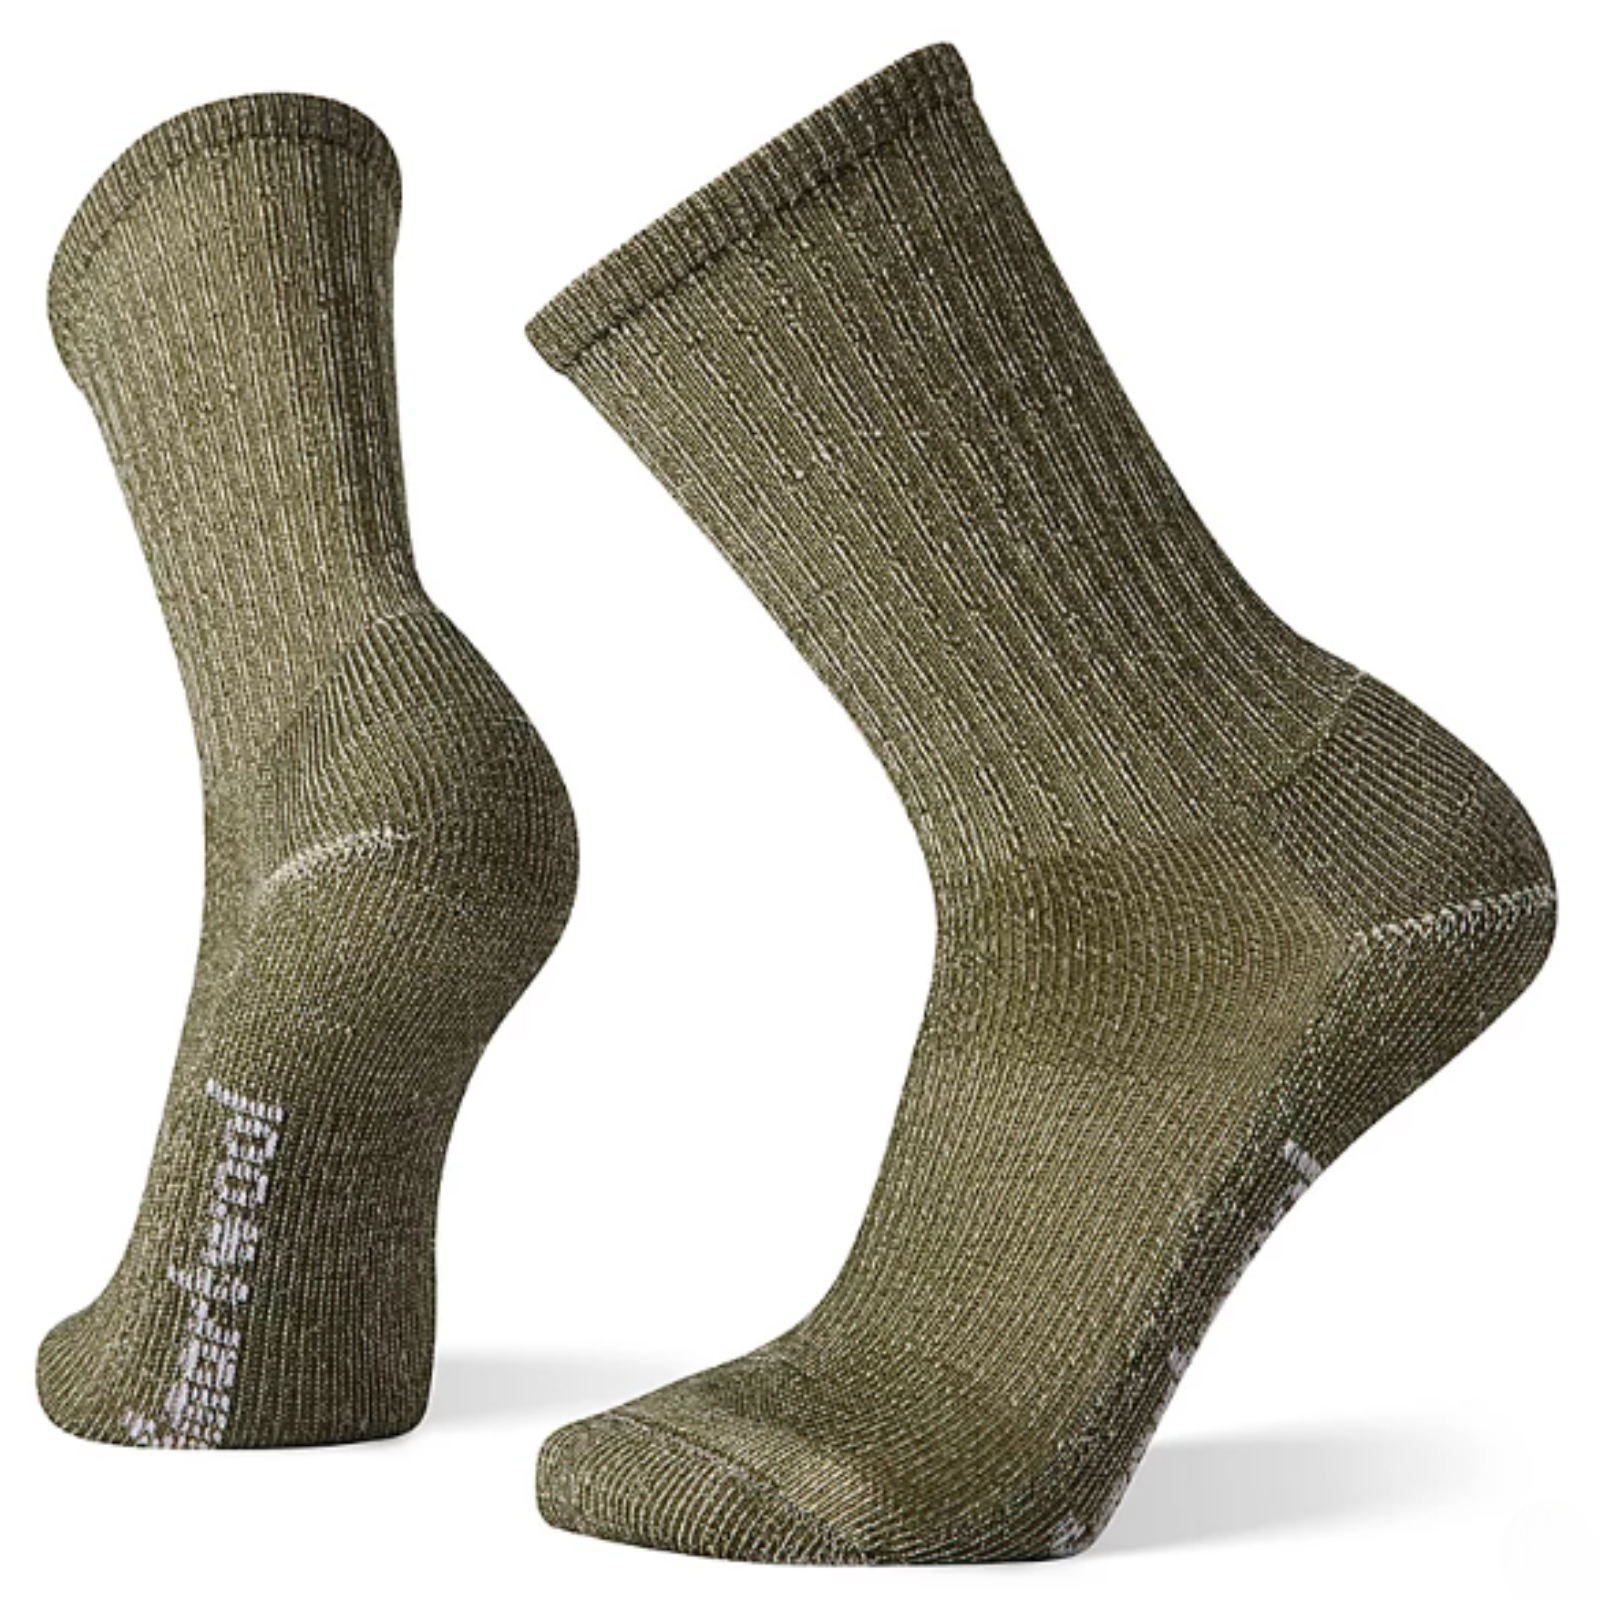 Smartwool Hike Classic Edition Light Cushion Crew men's sock featuring military olive colored sock shown on display feet. 